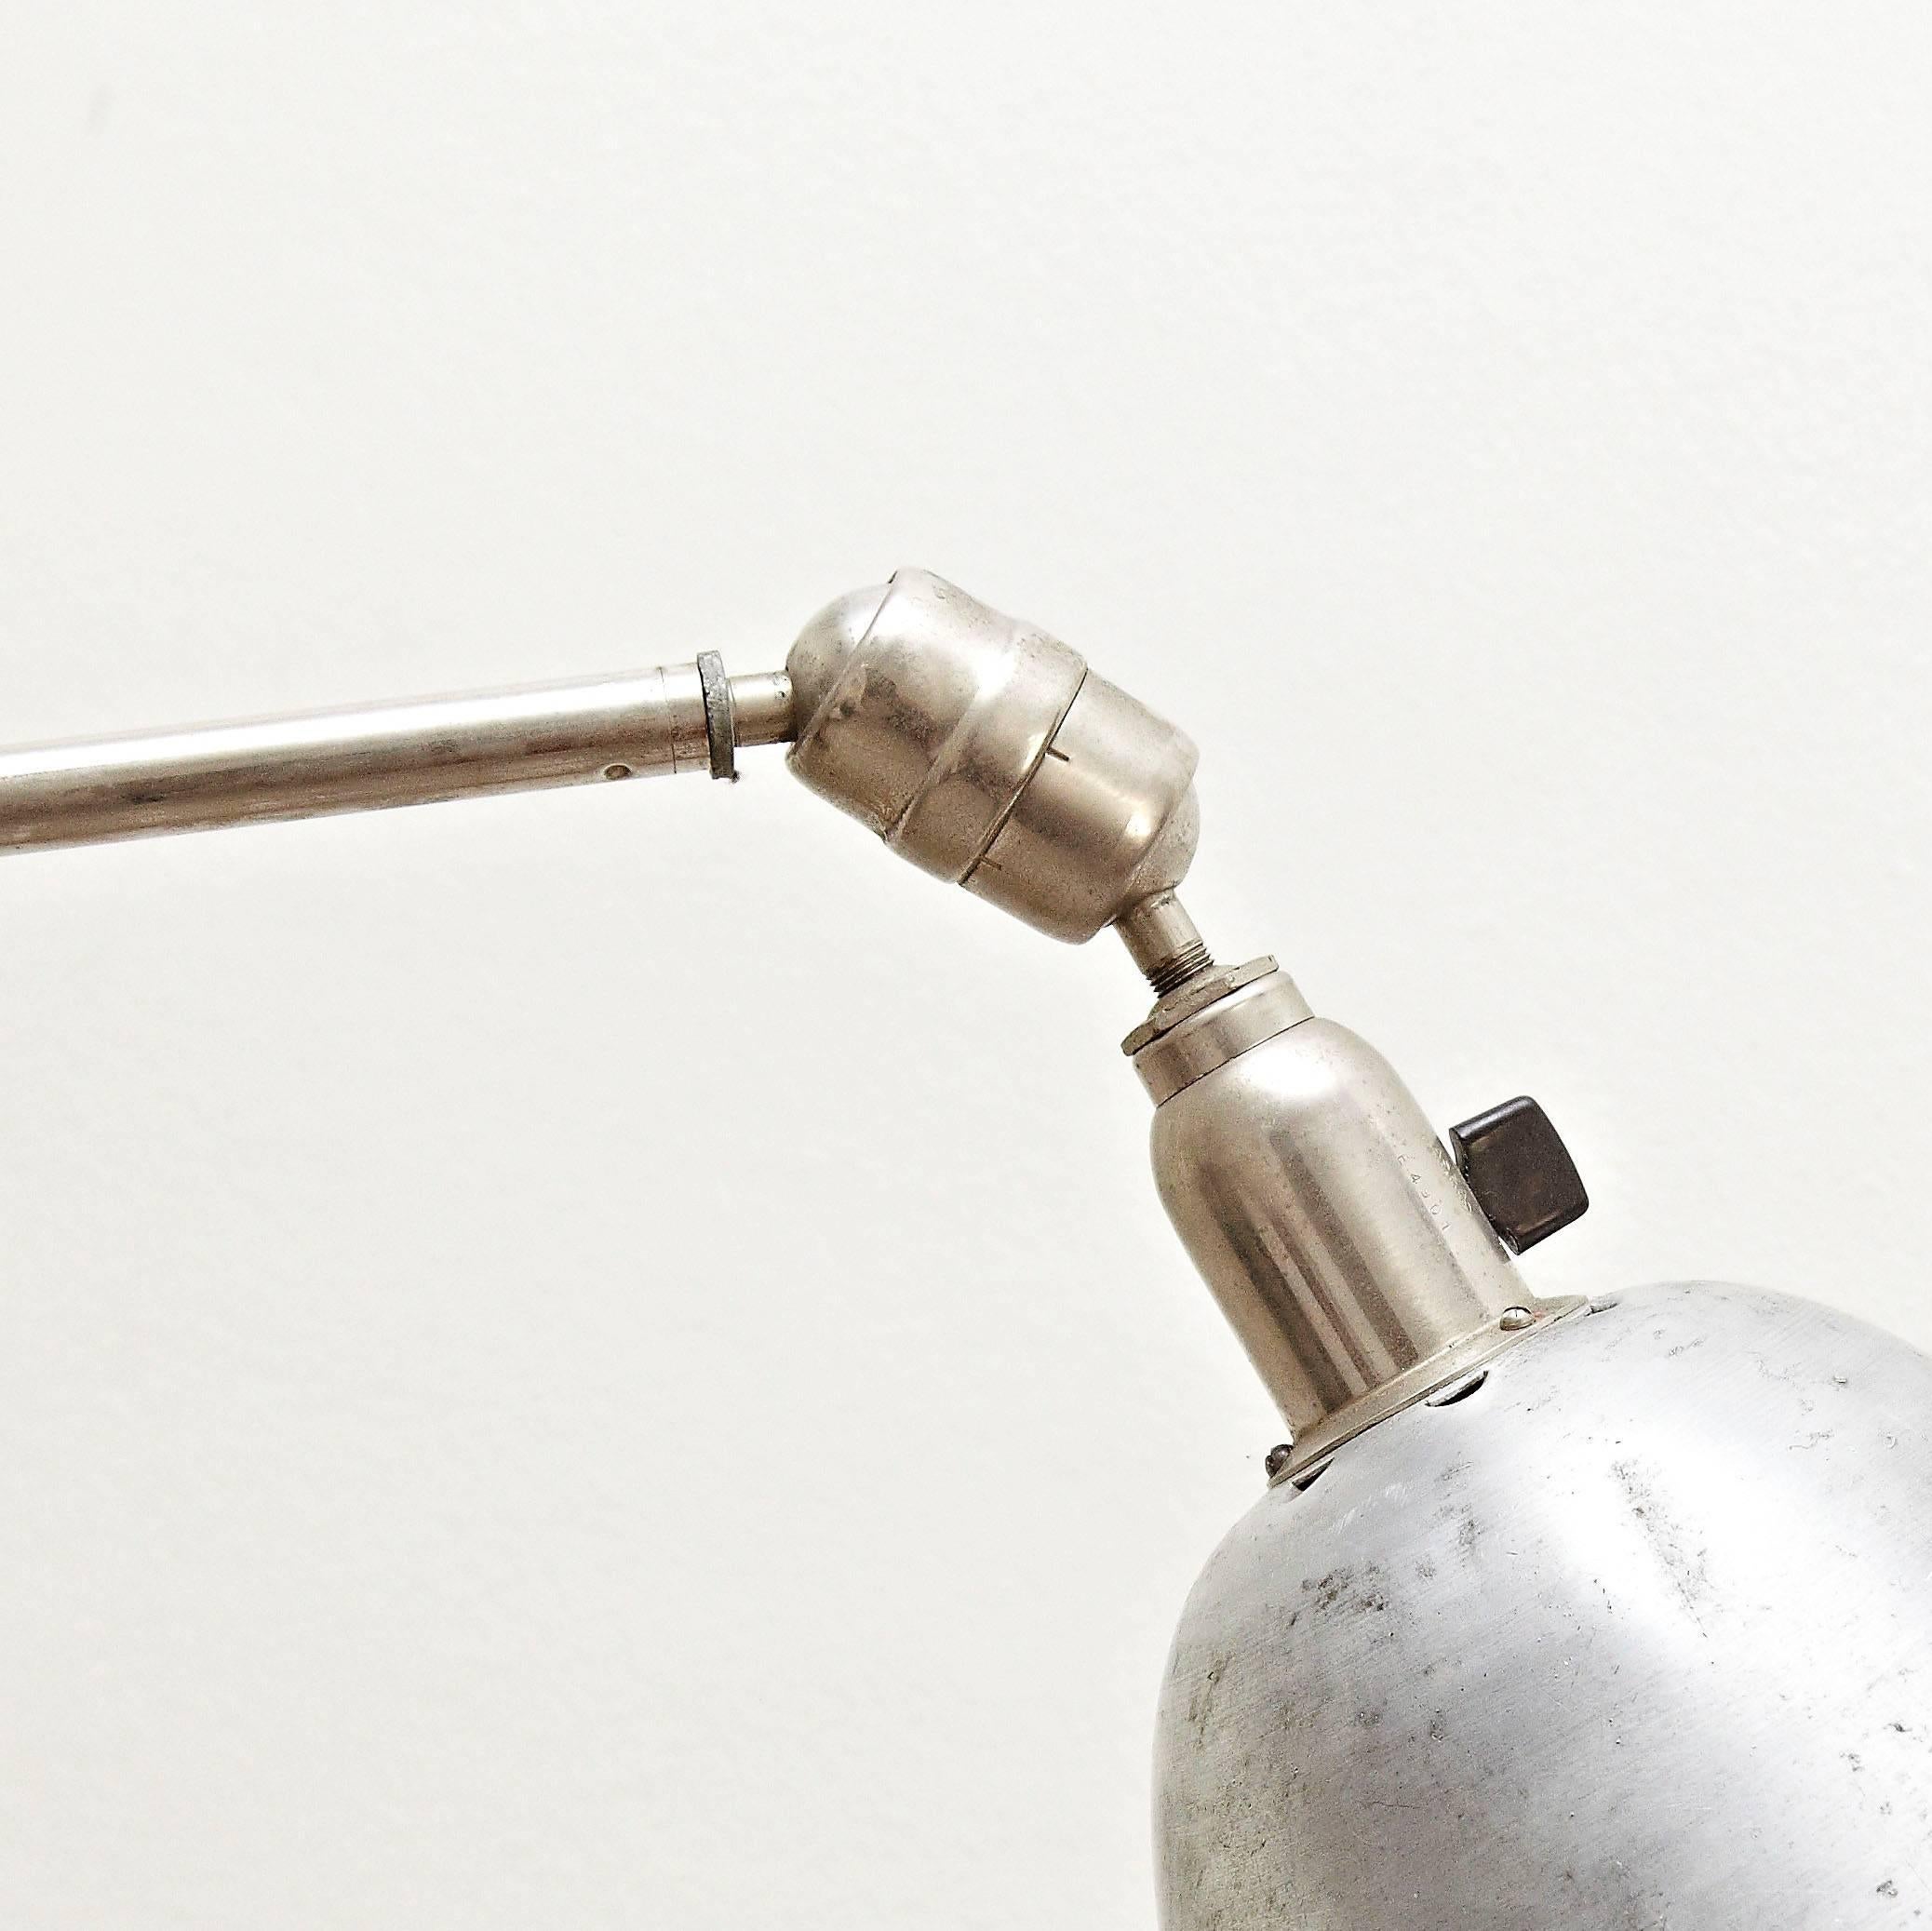 Wall lamp designed by Johan Petter Johansson.
Manufactured by Triplex (Sweden), circa 1930.
Aluminium and steel.

In good original condition, with minor wear consistent with age and use, preserving a beautiful patina.

 